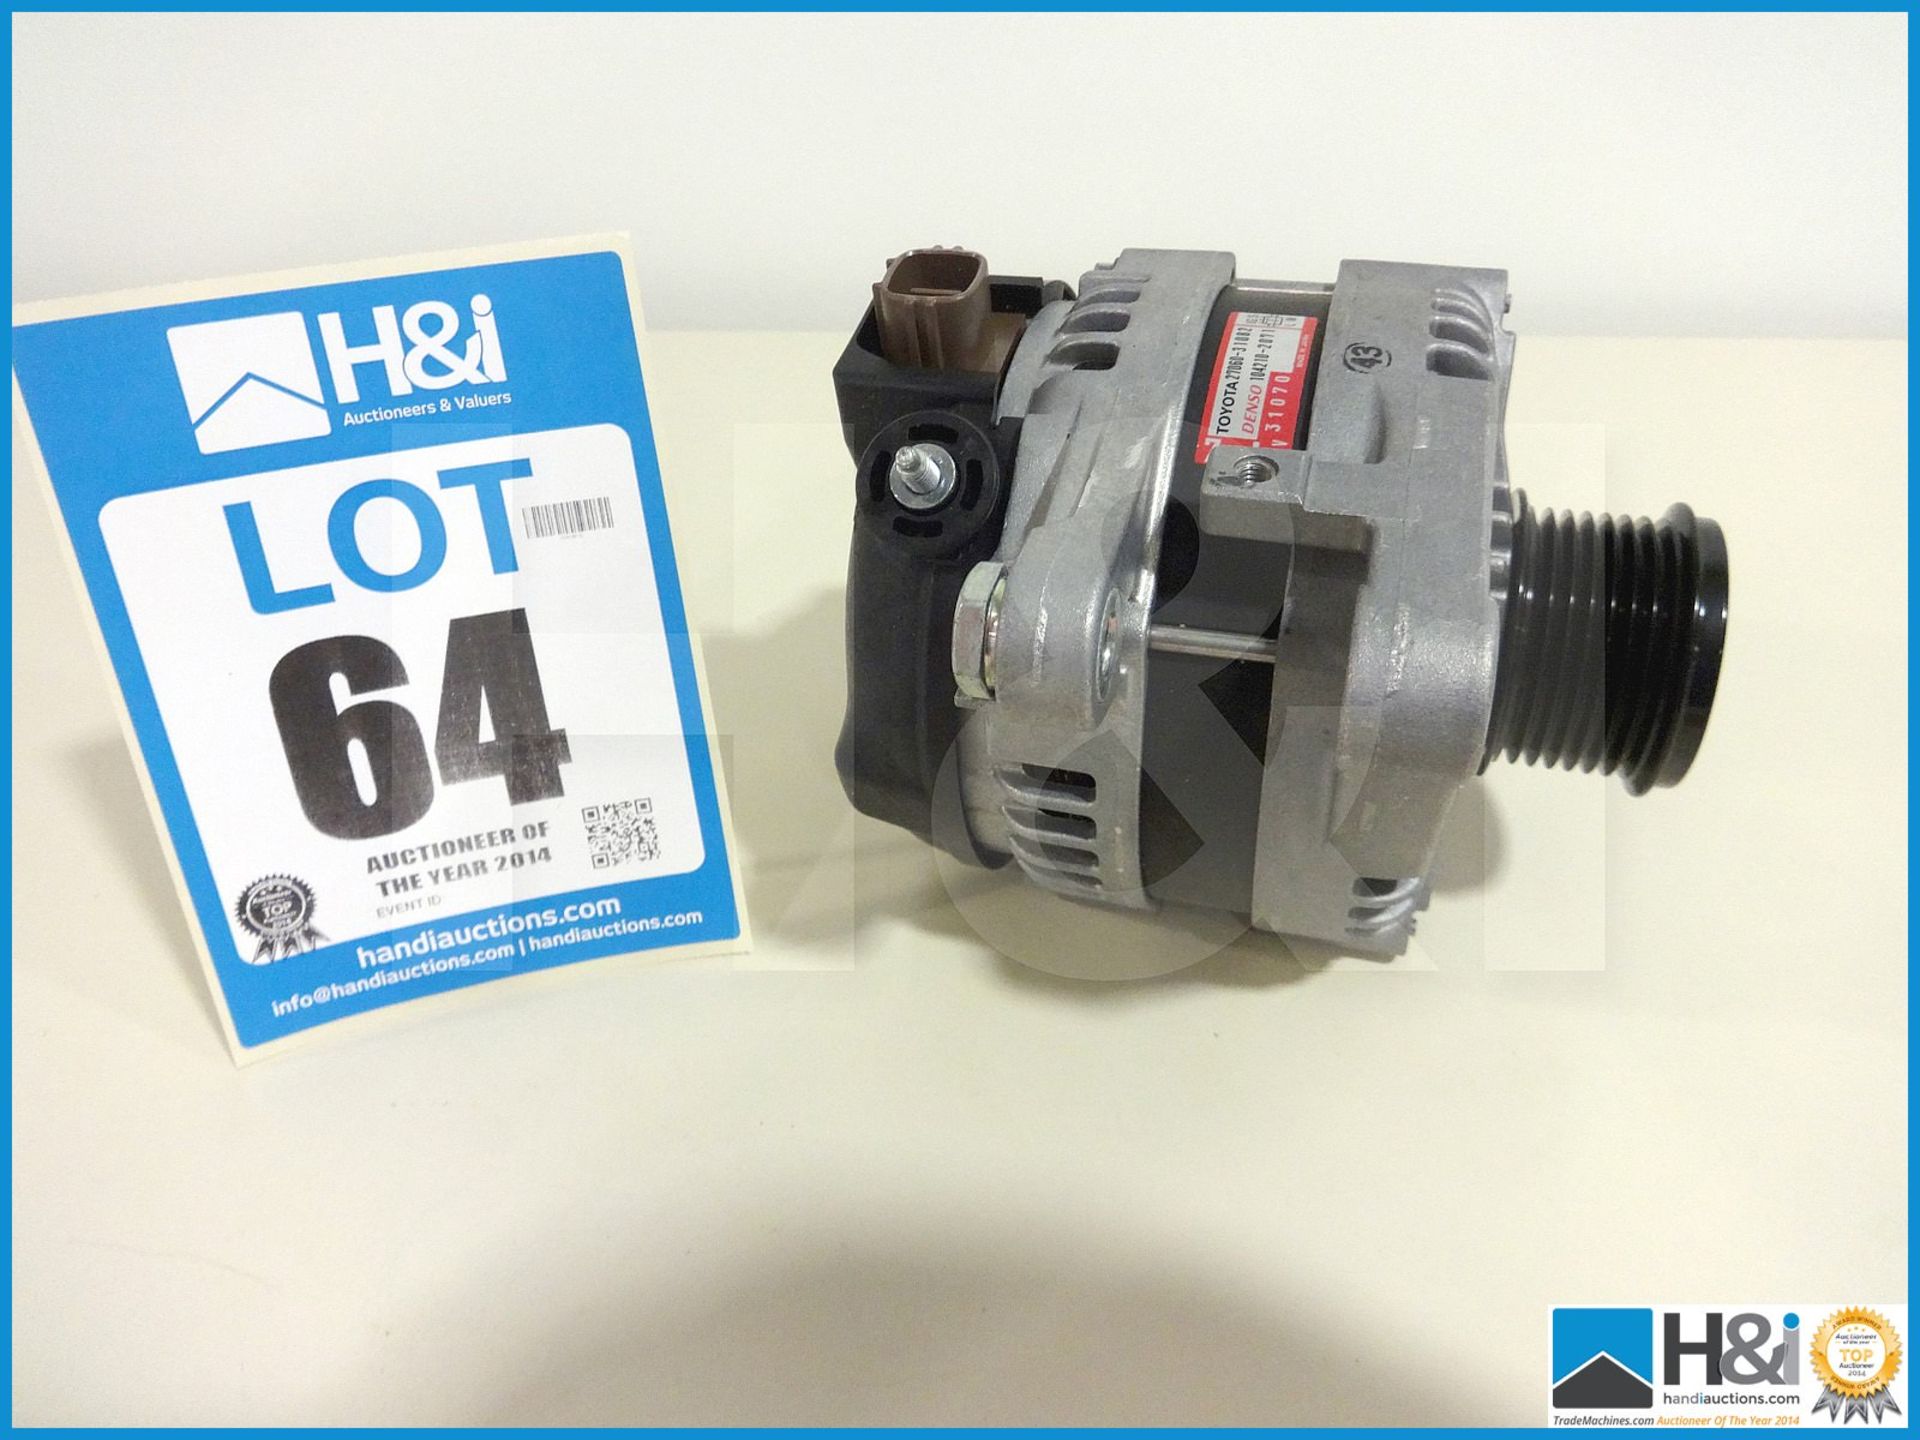 Alternator to suit V6 Lotus Evora engine. Brand new and unused. MC: N/A CILN: N/A - Image 2 of 2